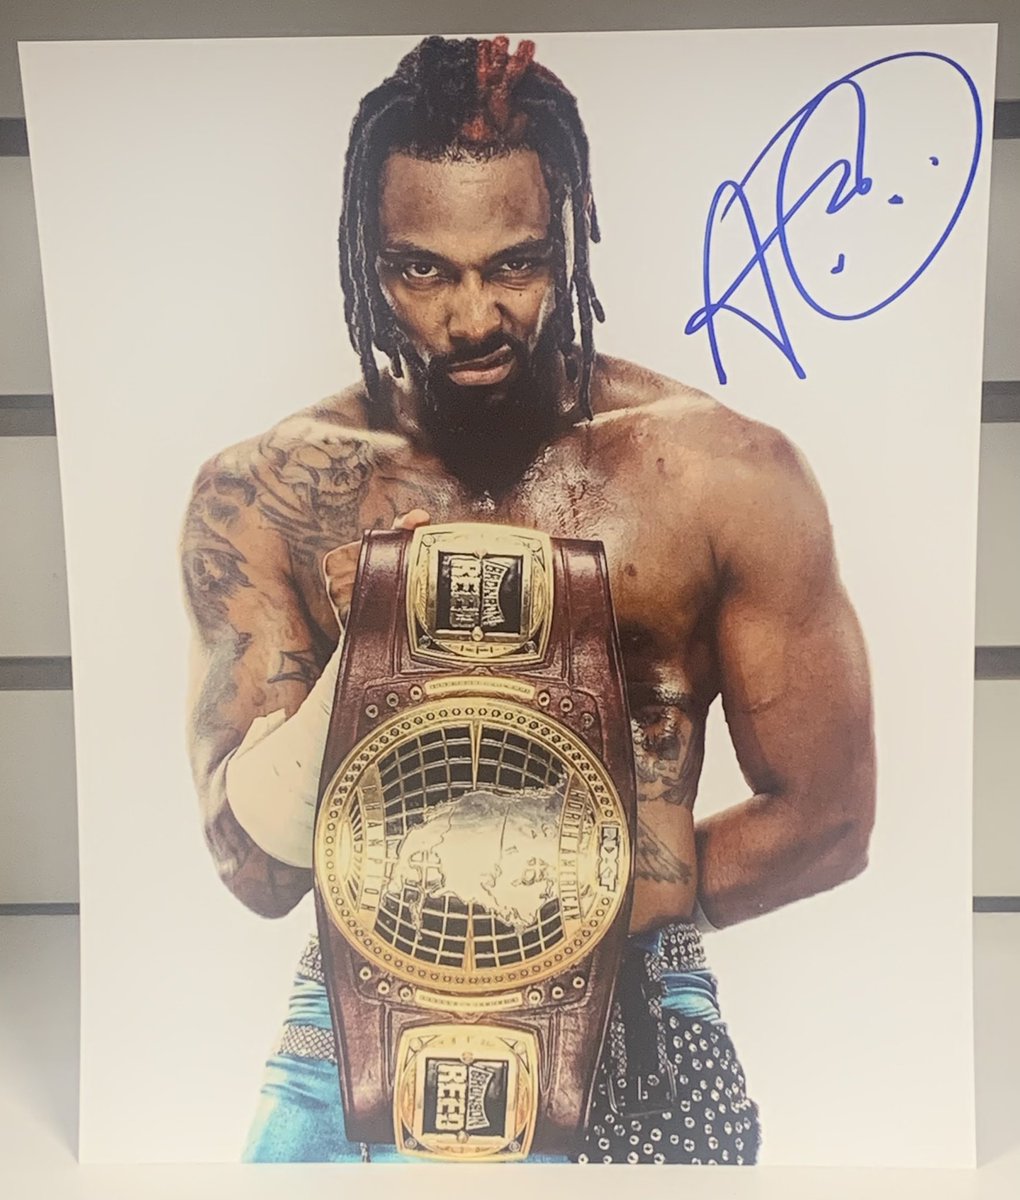 Added more Swerve Strickland Signed 8x10 Color Photos to our Website at TheWrestlingUniverse.com